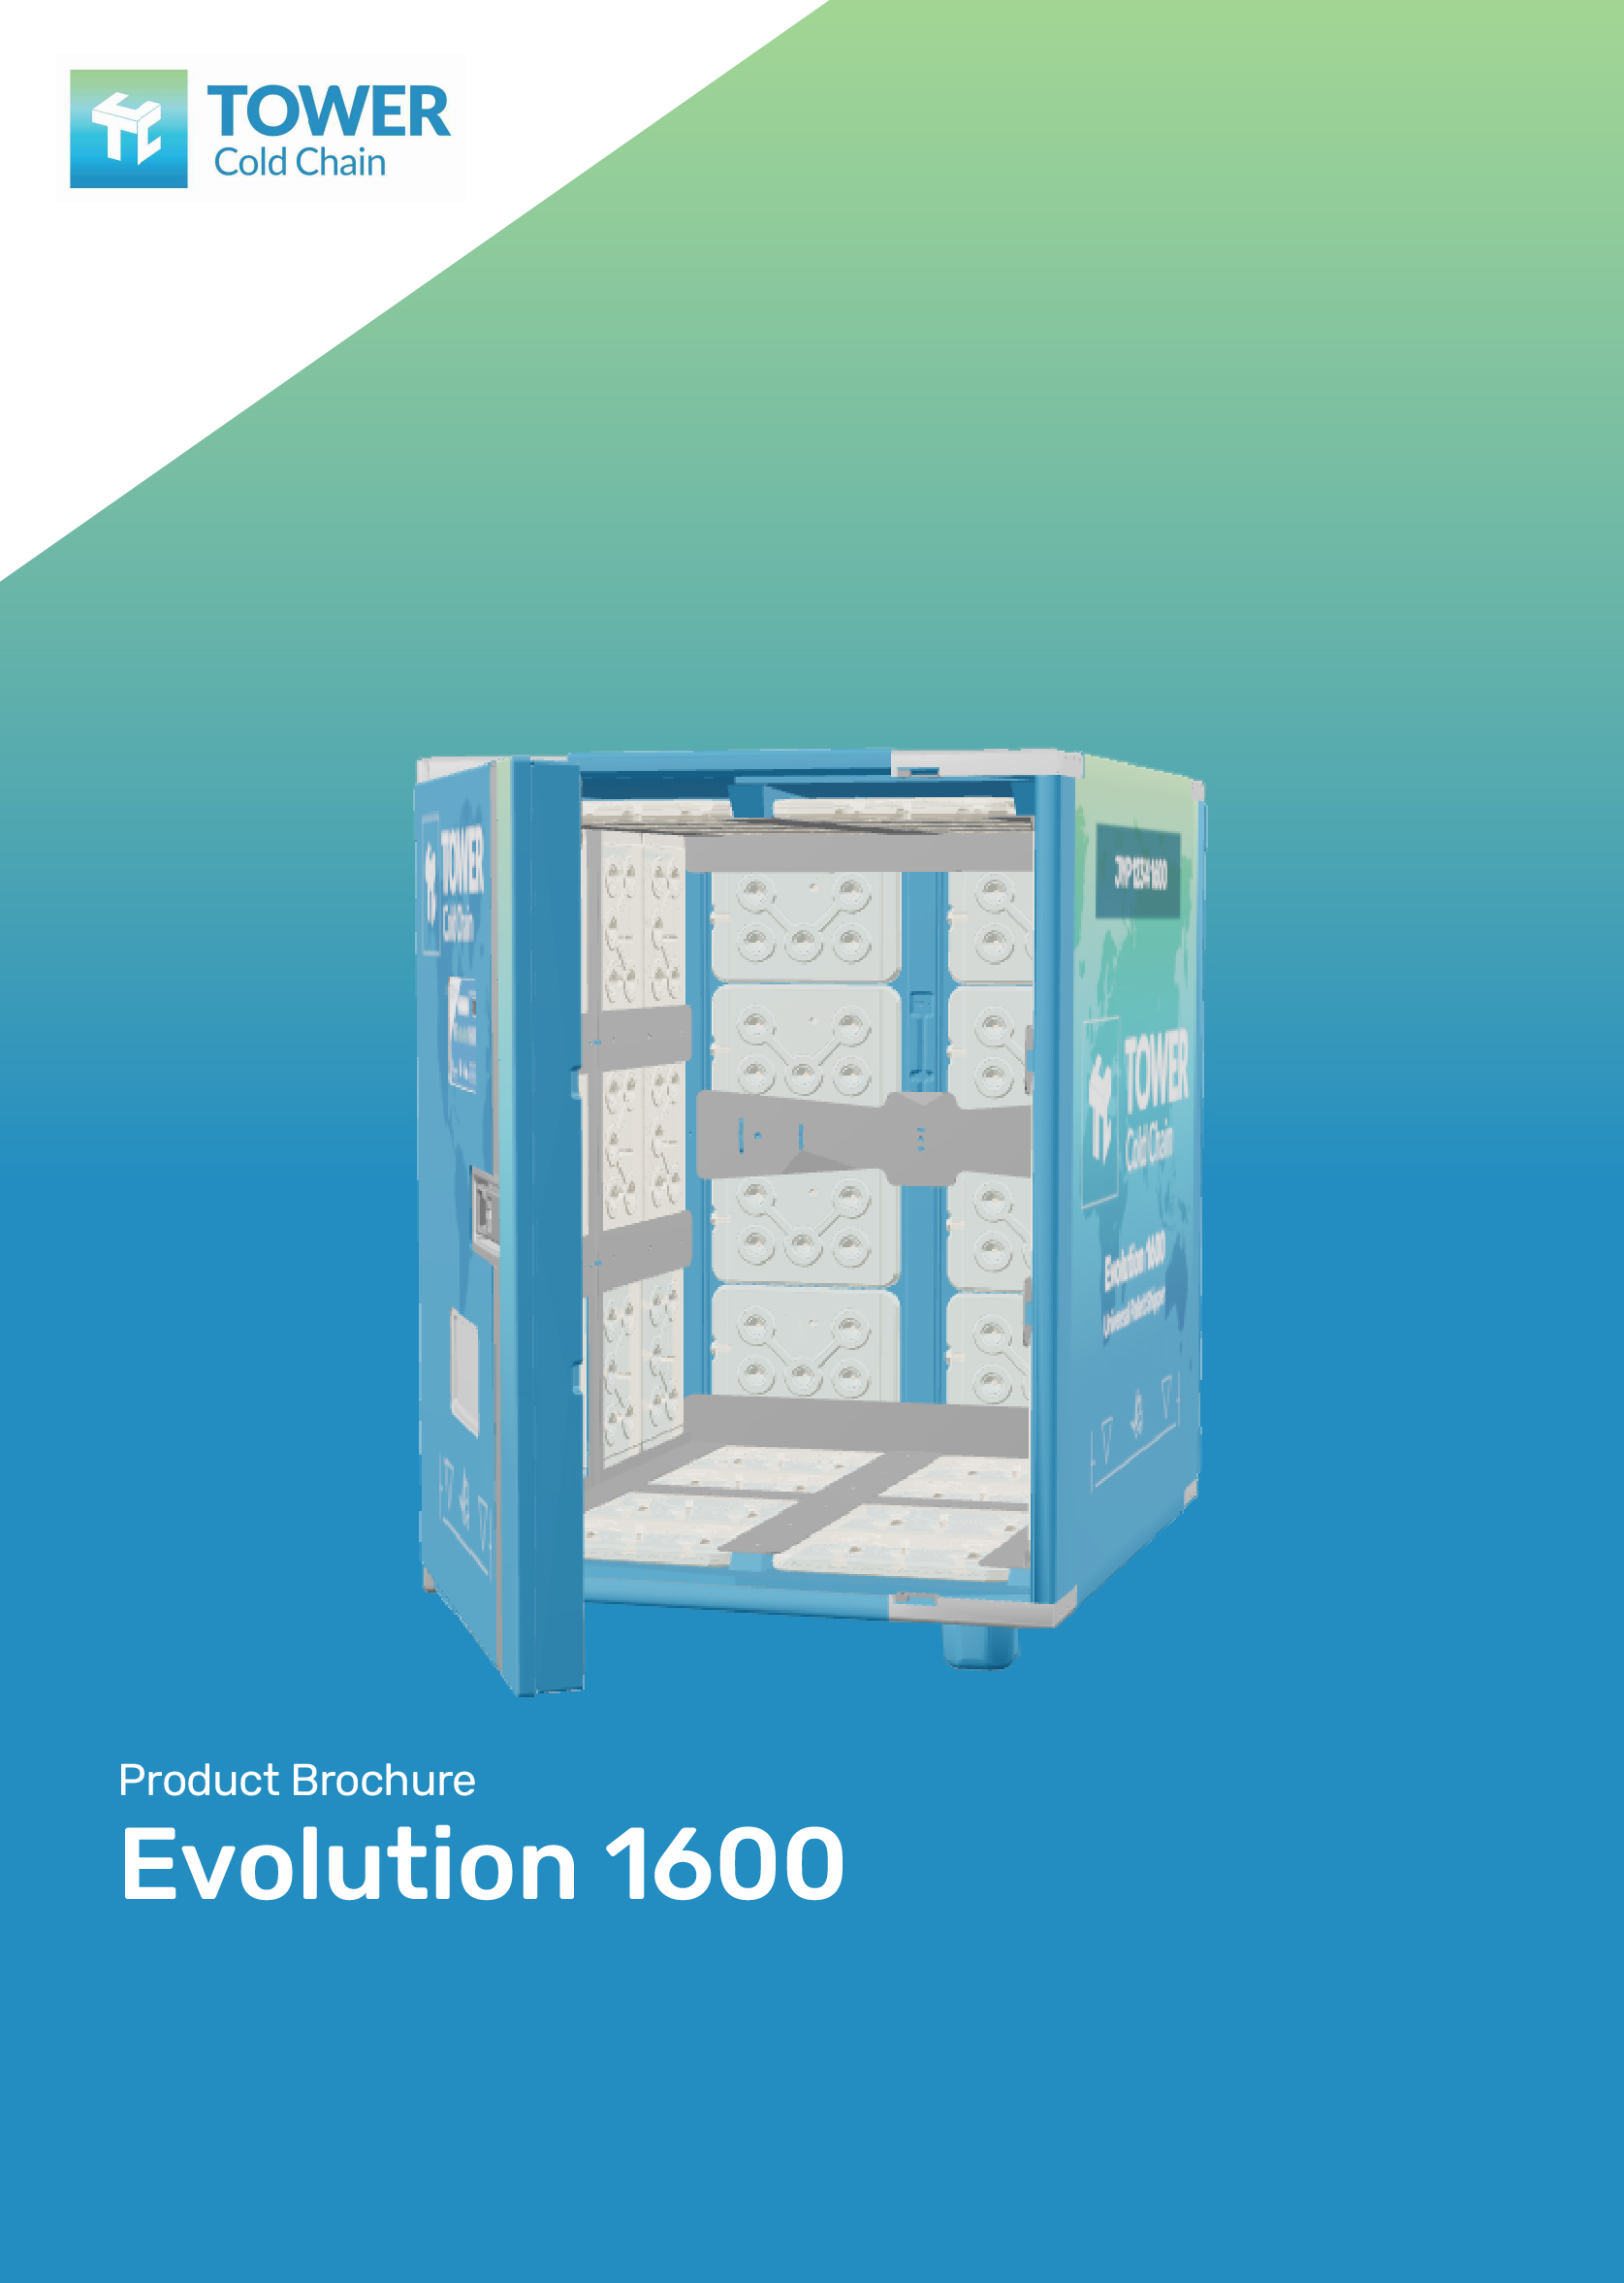 Evolution 1600 Tower Universal Pallet Product Brochure